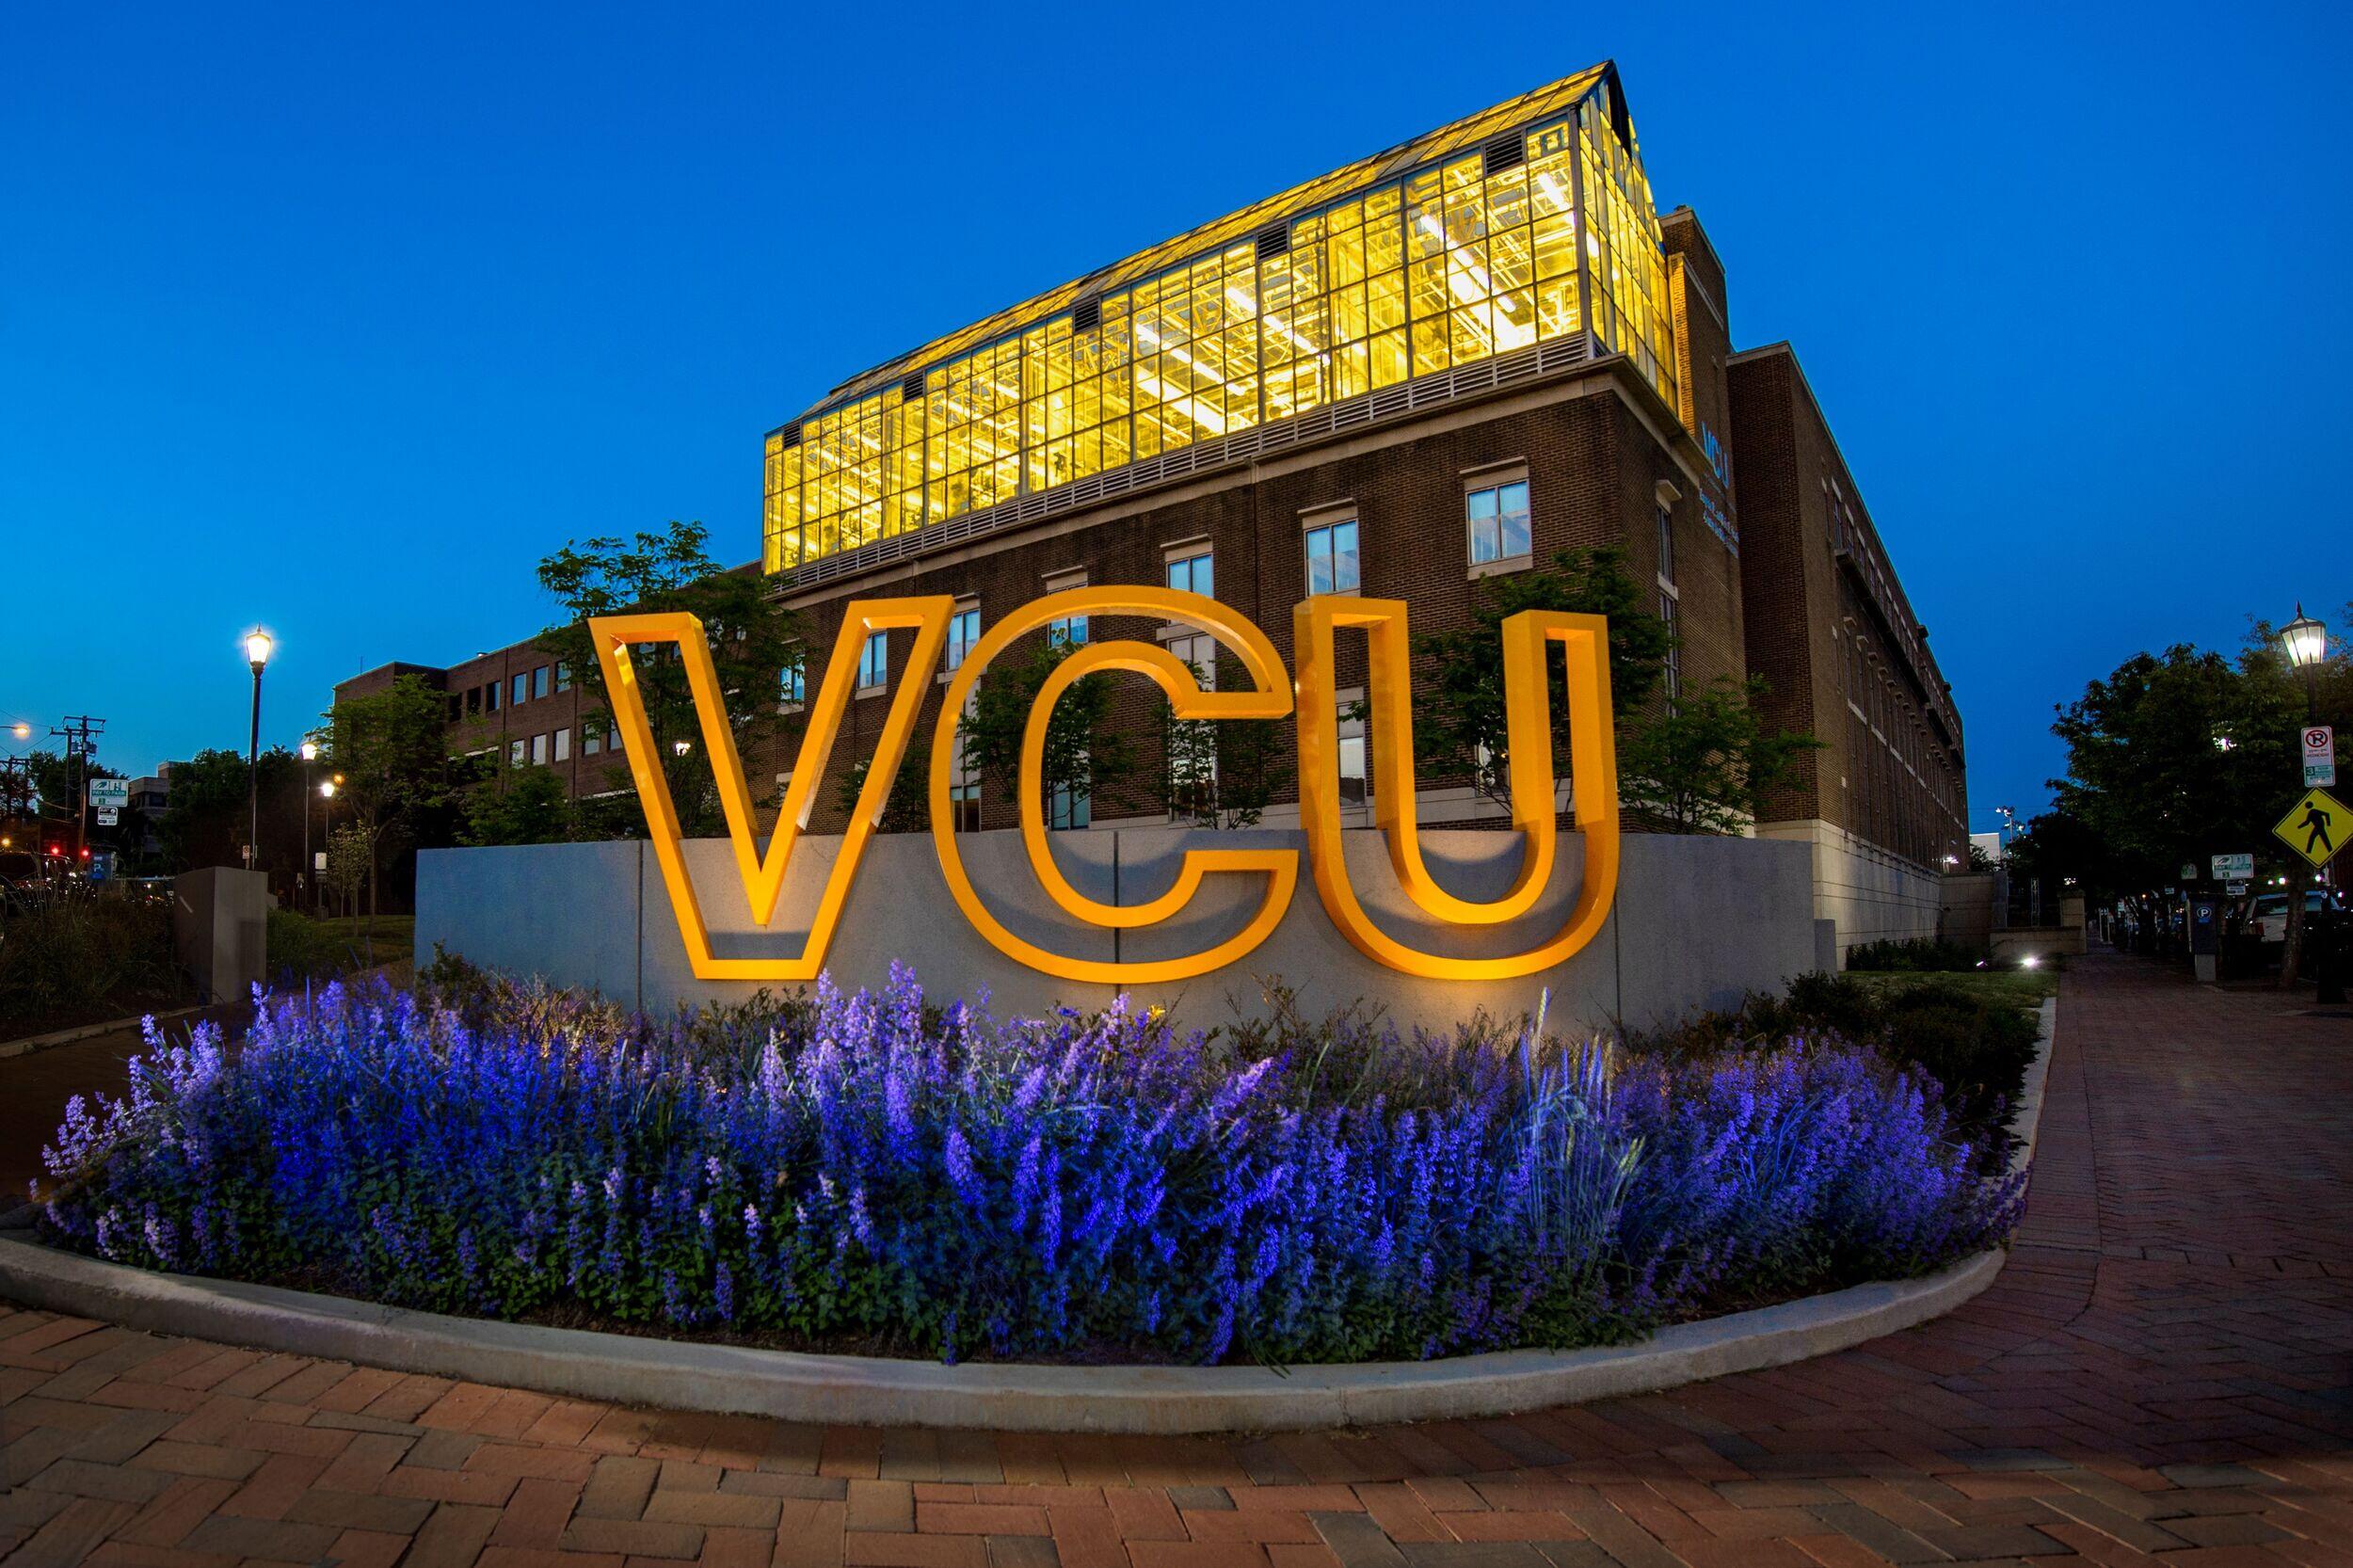 A photo of a sign lit up at dusk. The sign says \"VCU\" in large yellow letters.